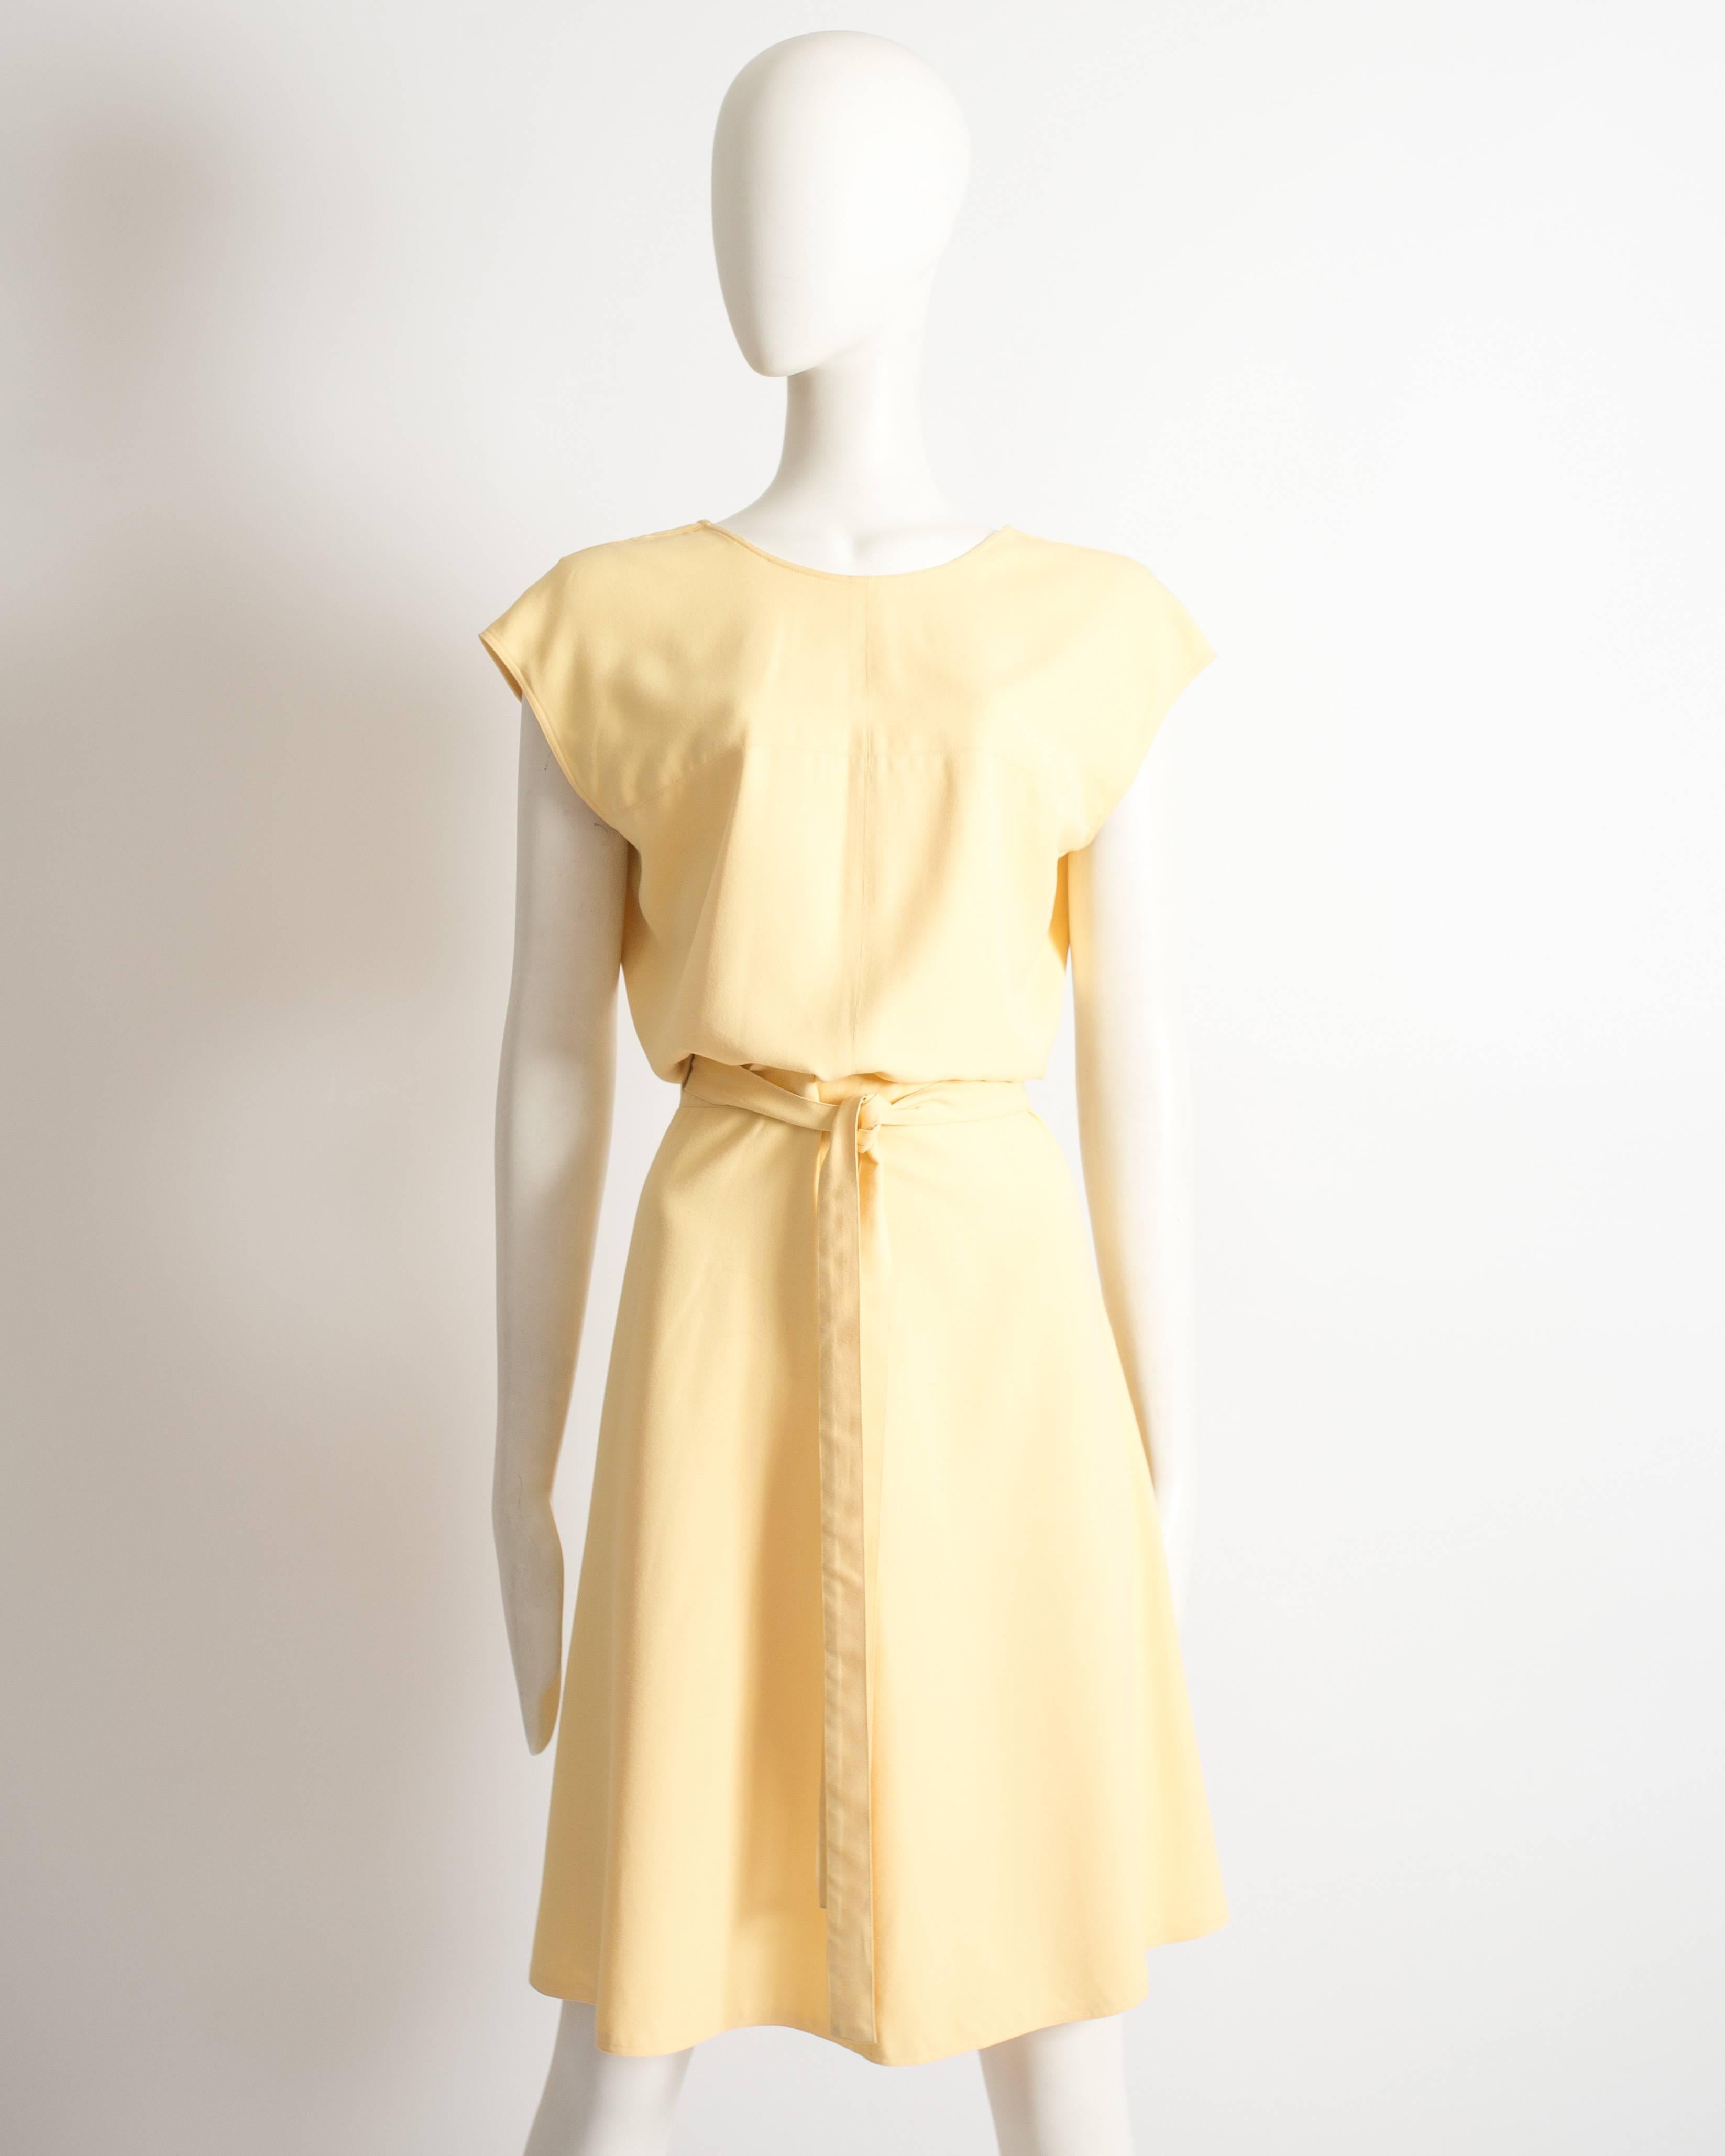 Alaia yellow cotton wrap dress, Spring-Summer 1990. Long waist belt fastening, v-neckline at the back and flared over the knee skirt.